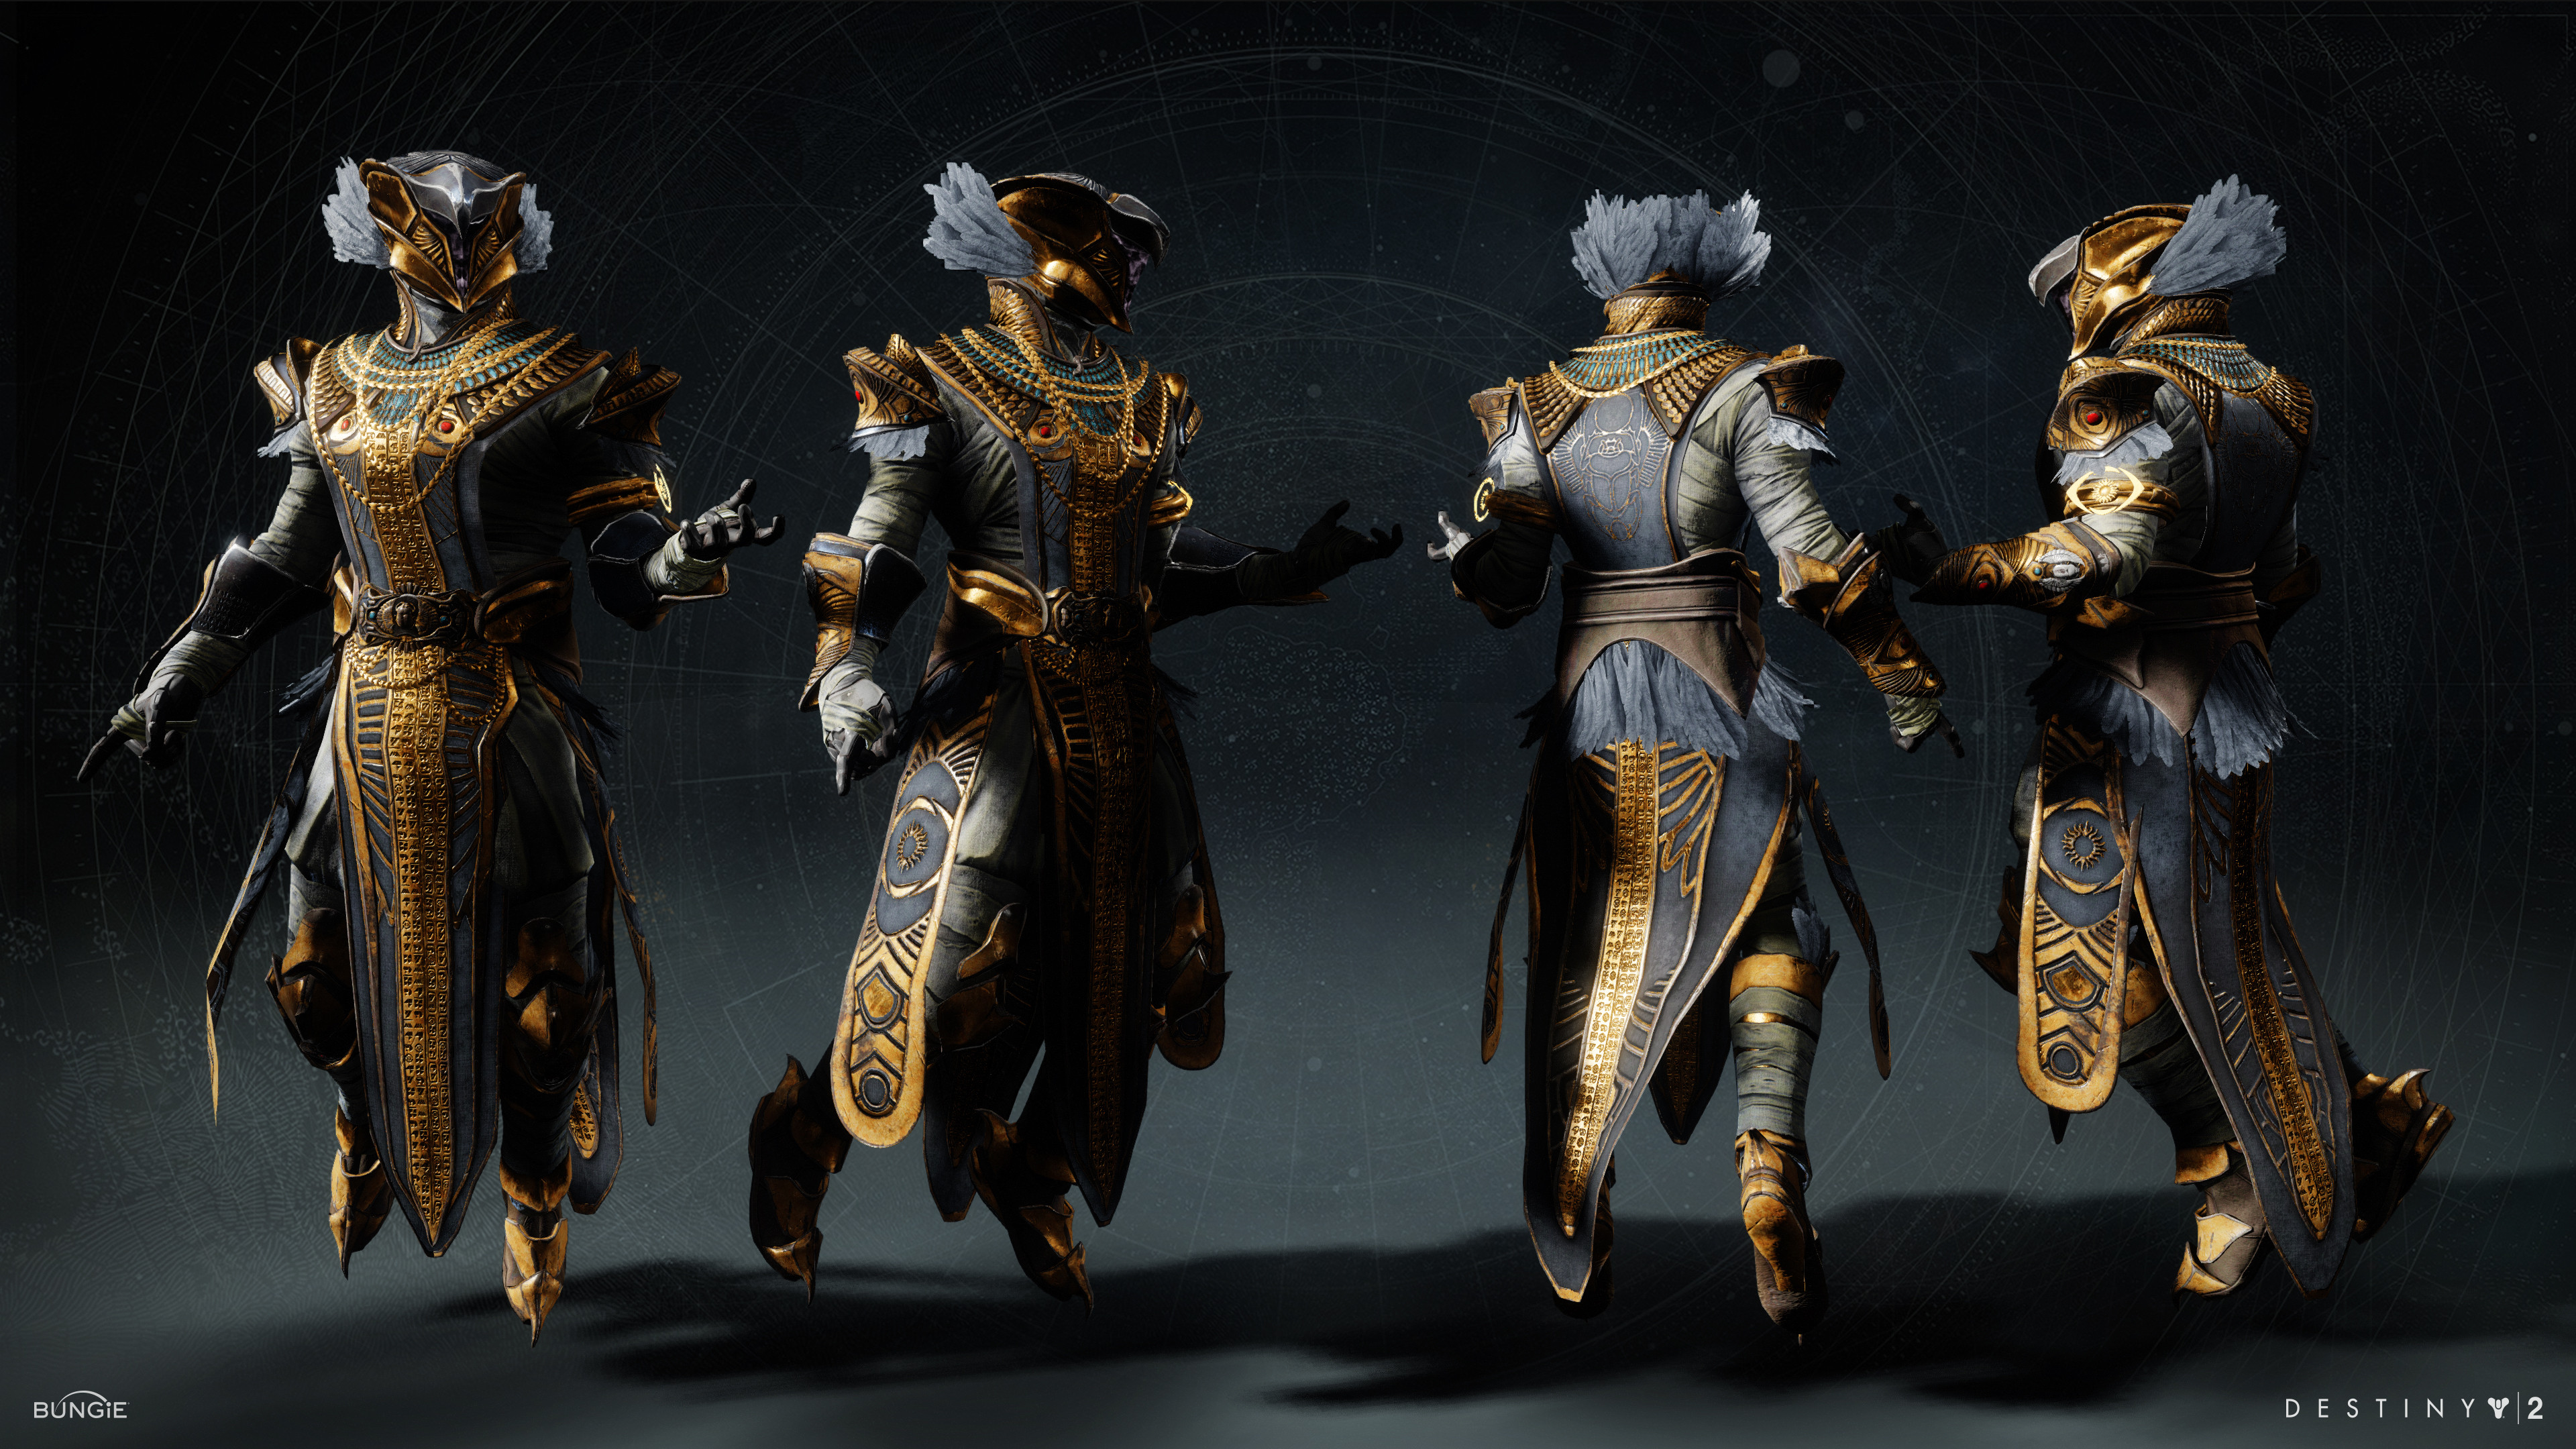 In game capture. The hieroglyph designs on the armor are from a Substance Designer generator I created. It was used for all Trials gear this year.